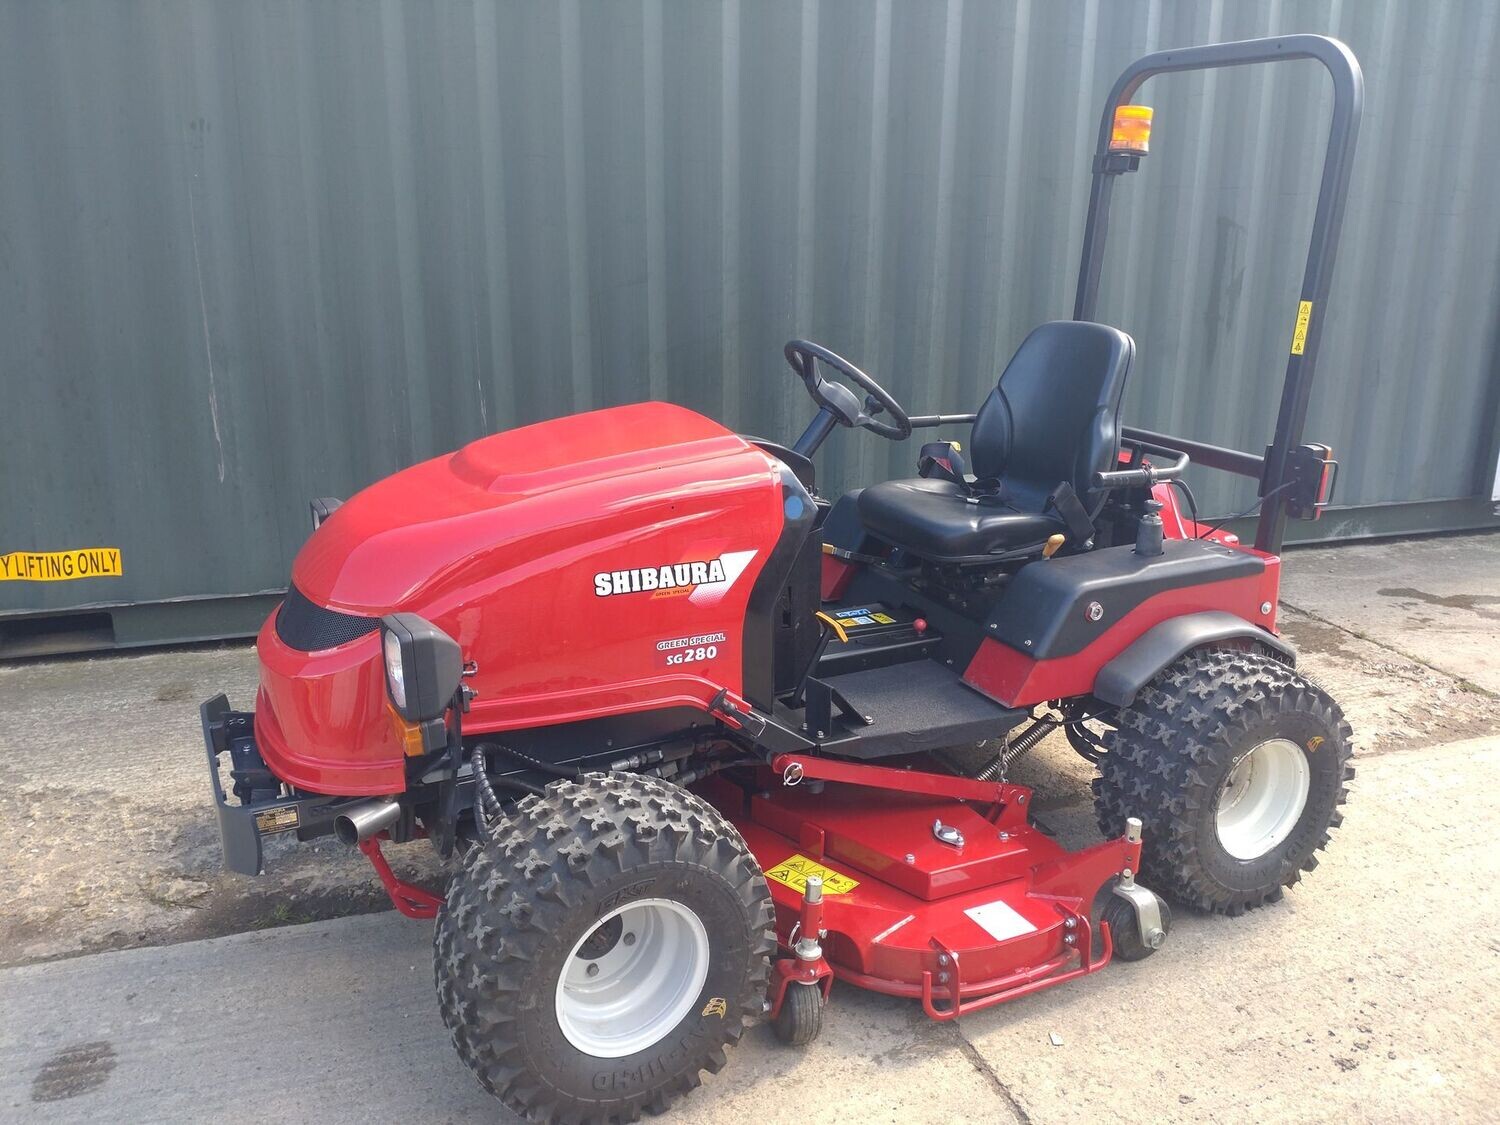 Shibaura Green Special SG280 Slope/Fairway Mower - (used) - NOW SOLD